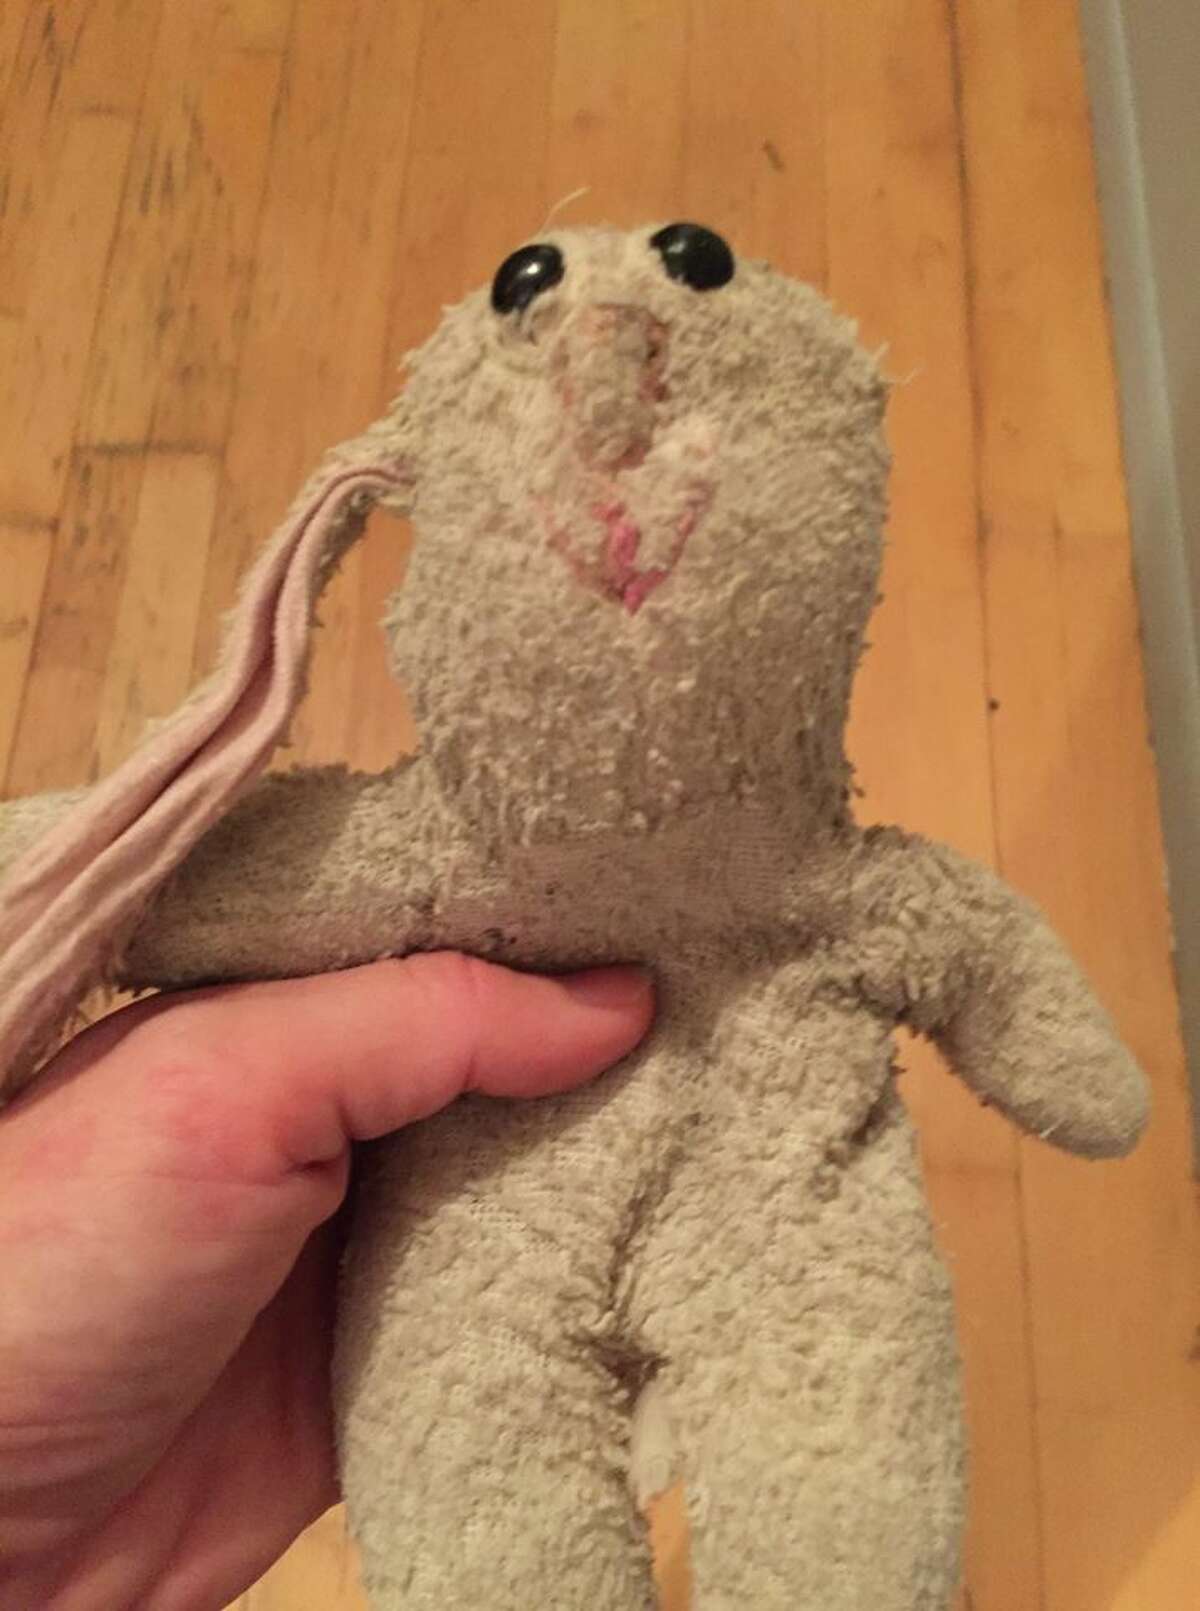 A California family is searching for their 9-year-old daughter's beloved stuffed Bunny, which they said was lost Nov. 24 in the Capital Region.